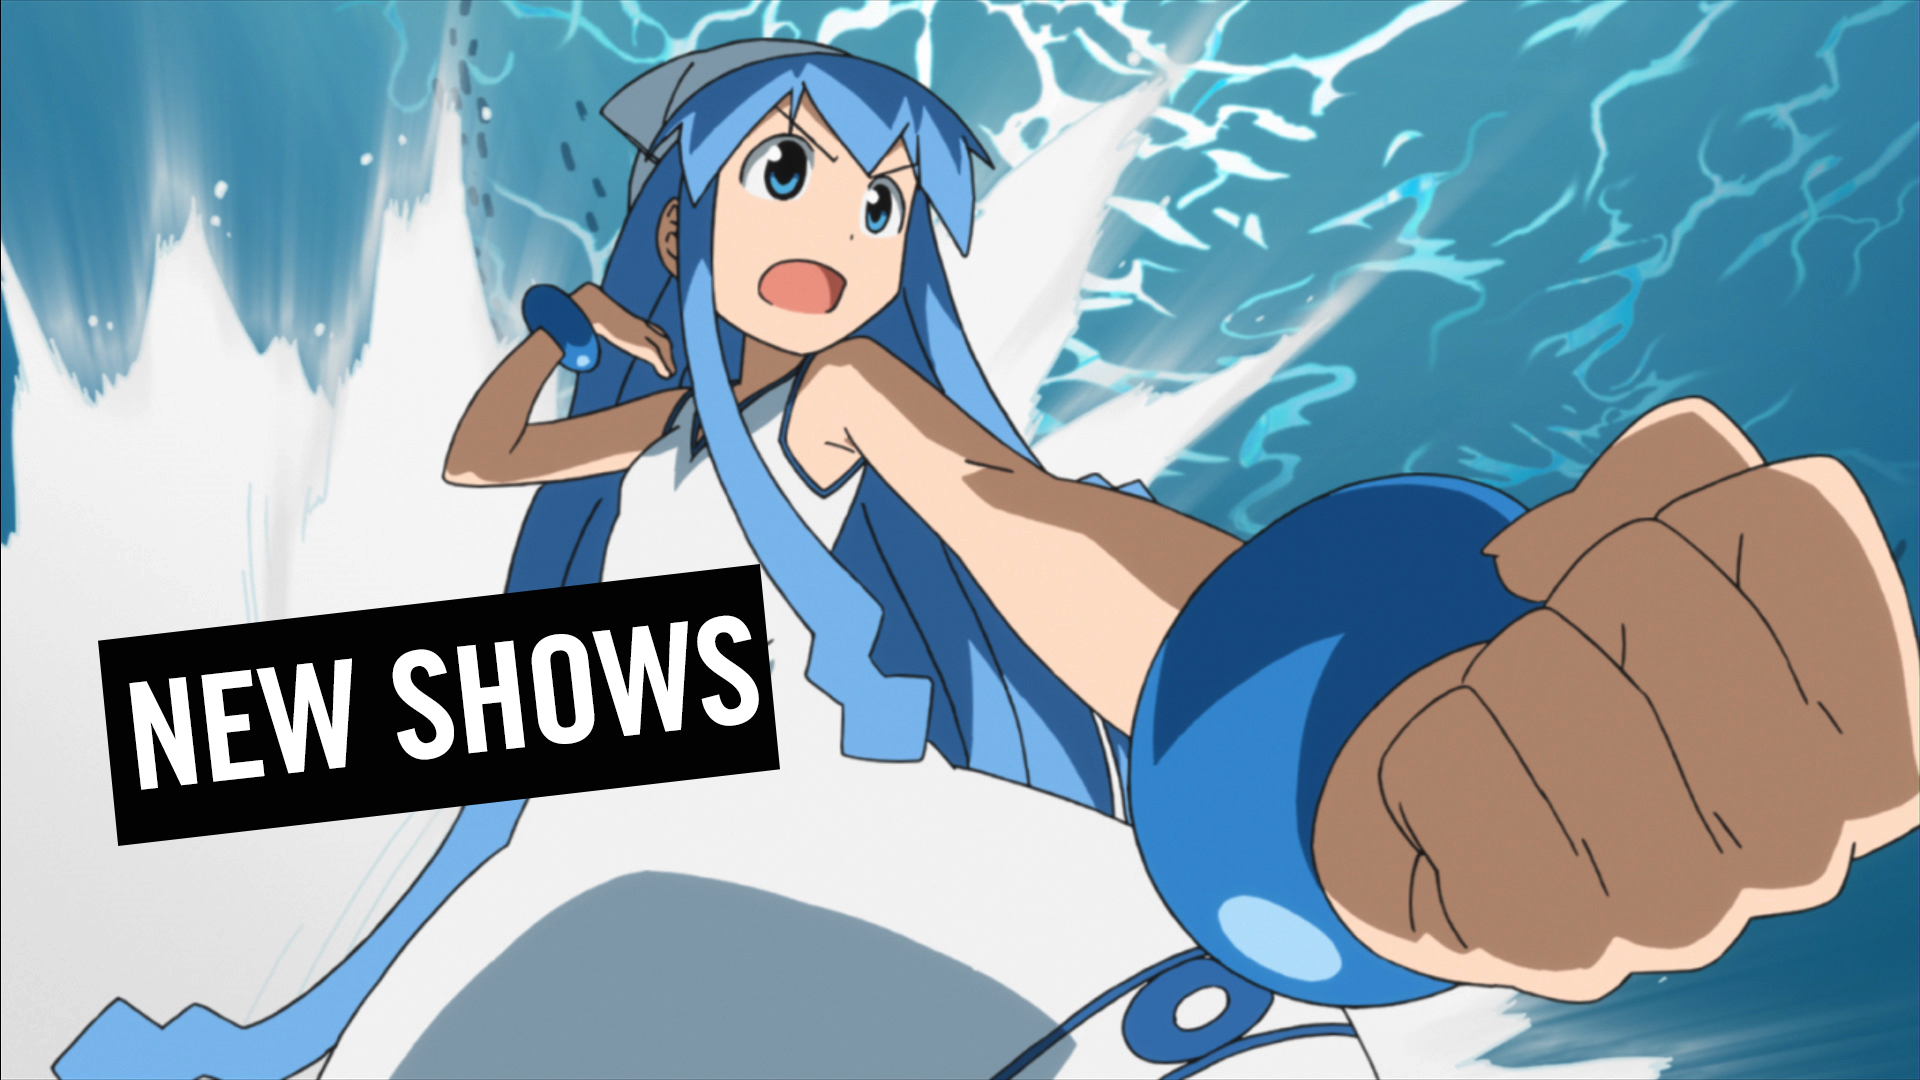 Pictures squid girl Anime